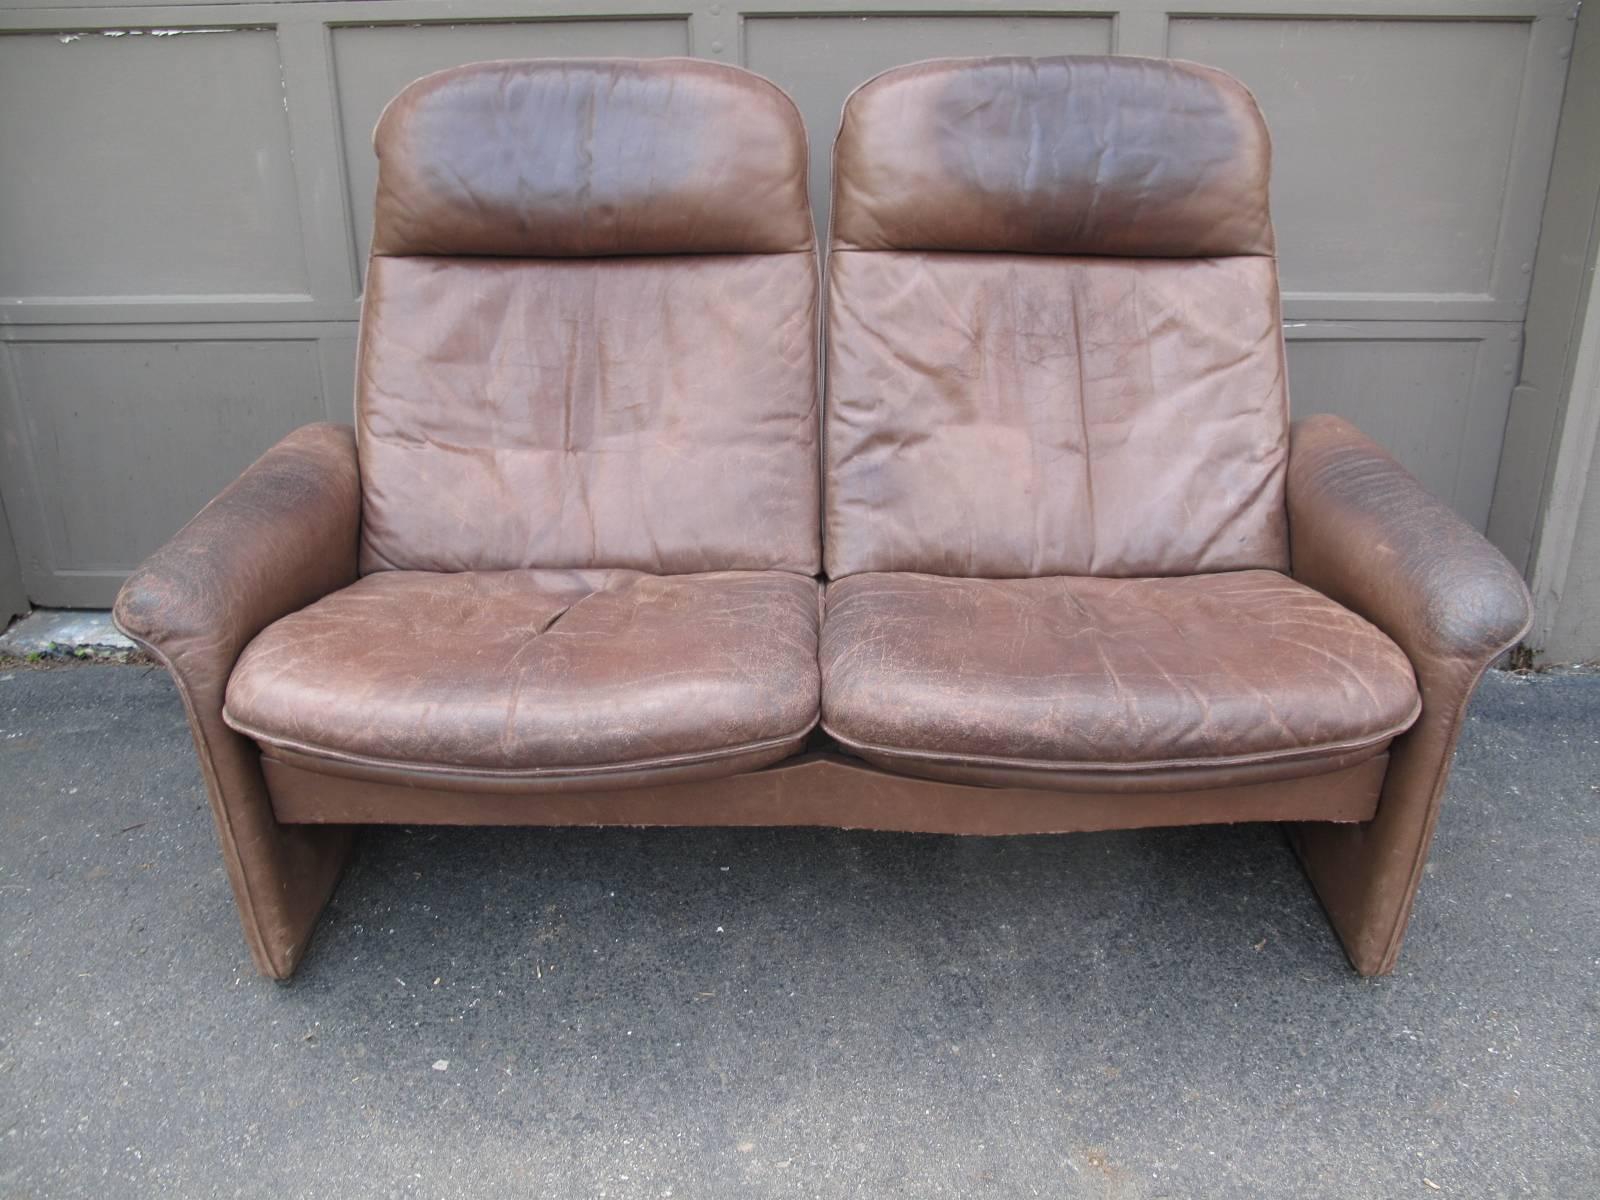 Late 20th century two-person loveseat by Swiss design house De Sede. 

Fabric on underside of the seat is labelled (images available upon request).